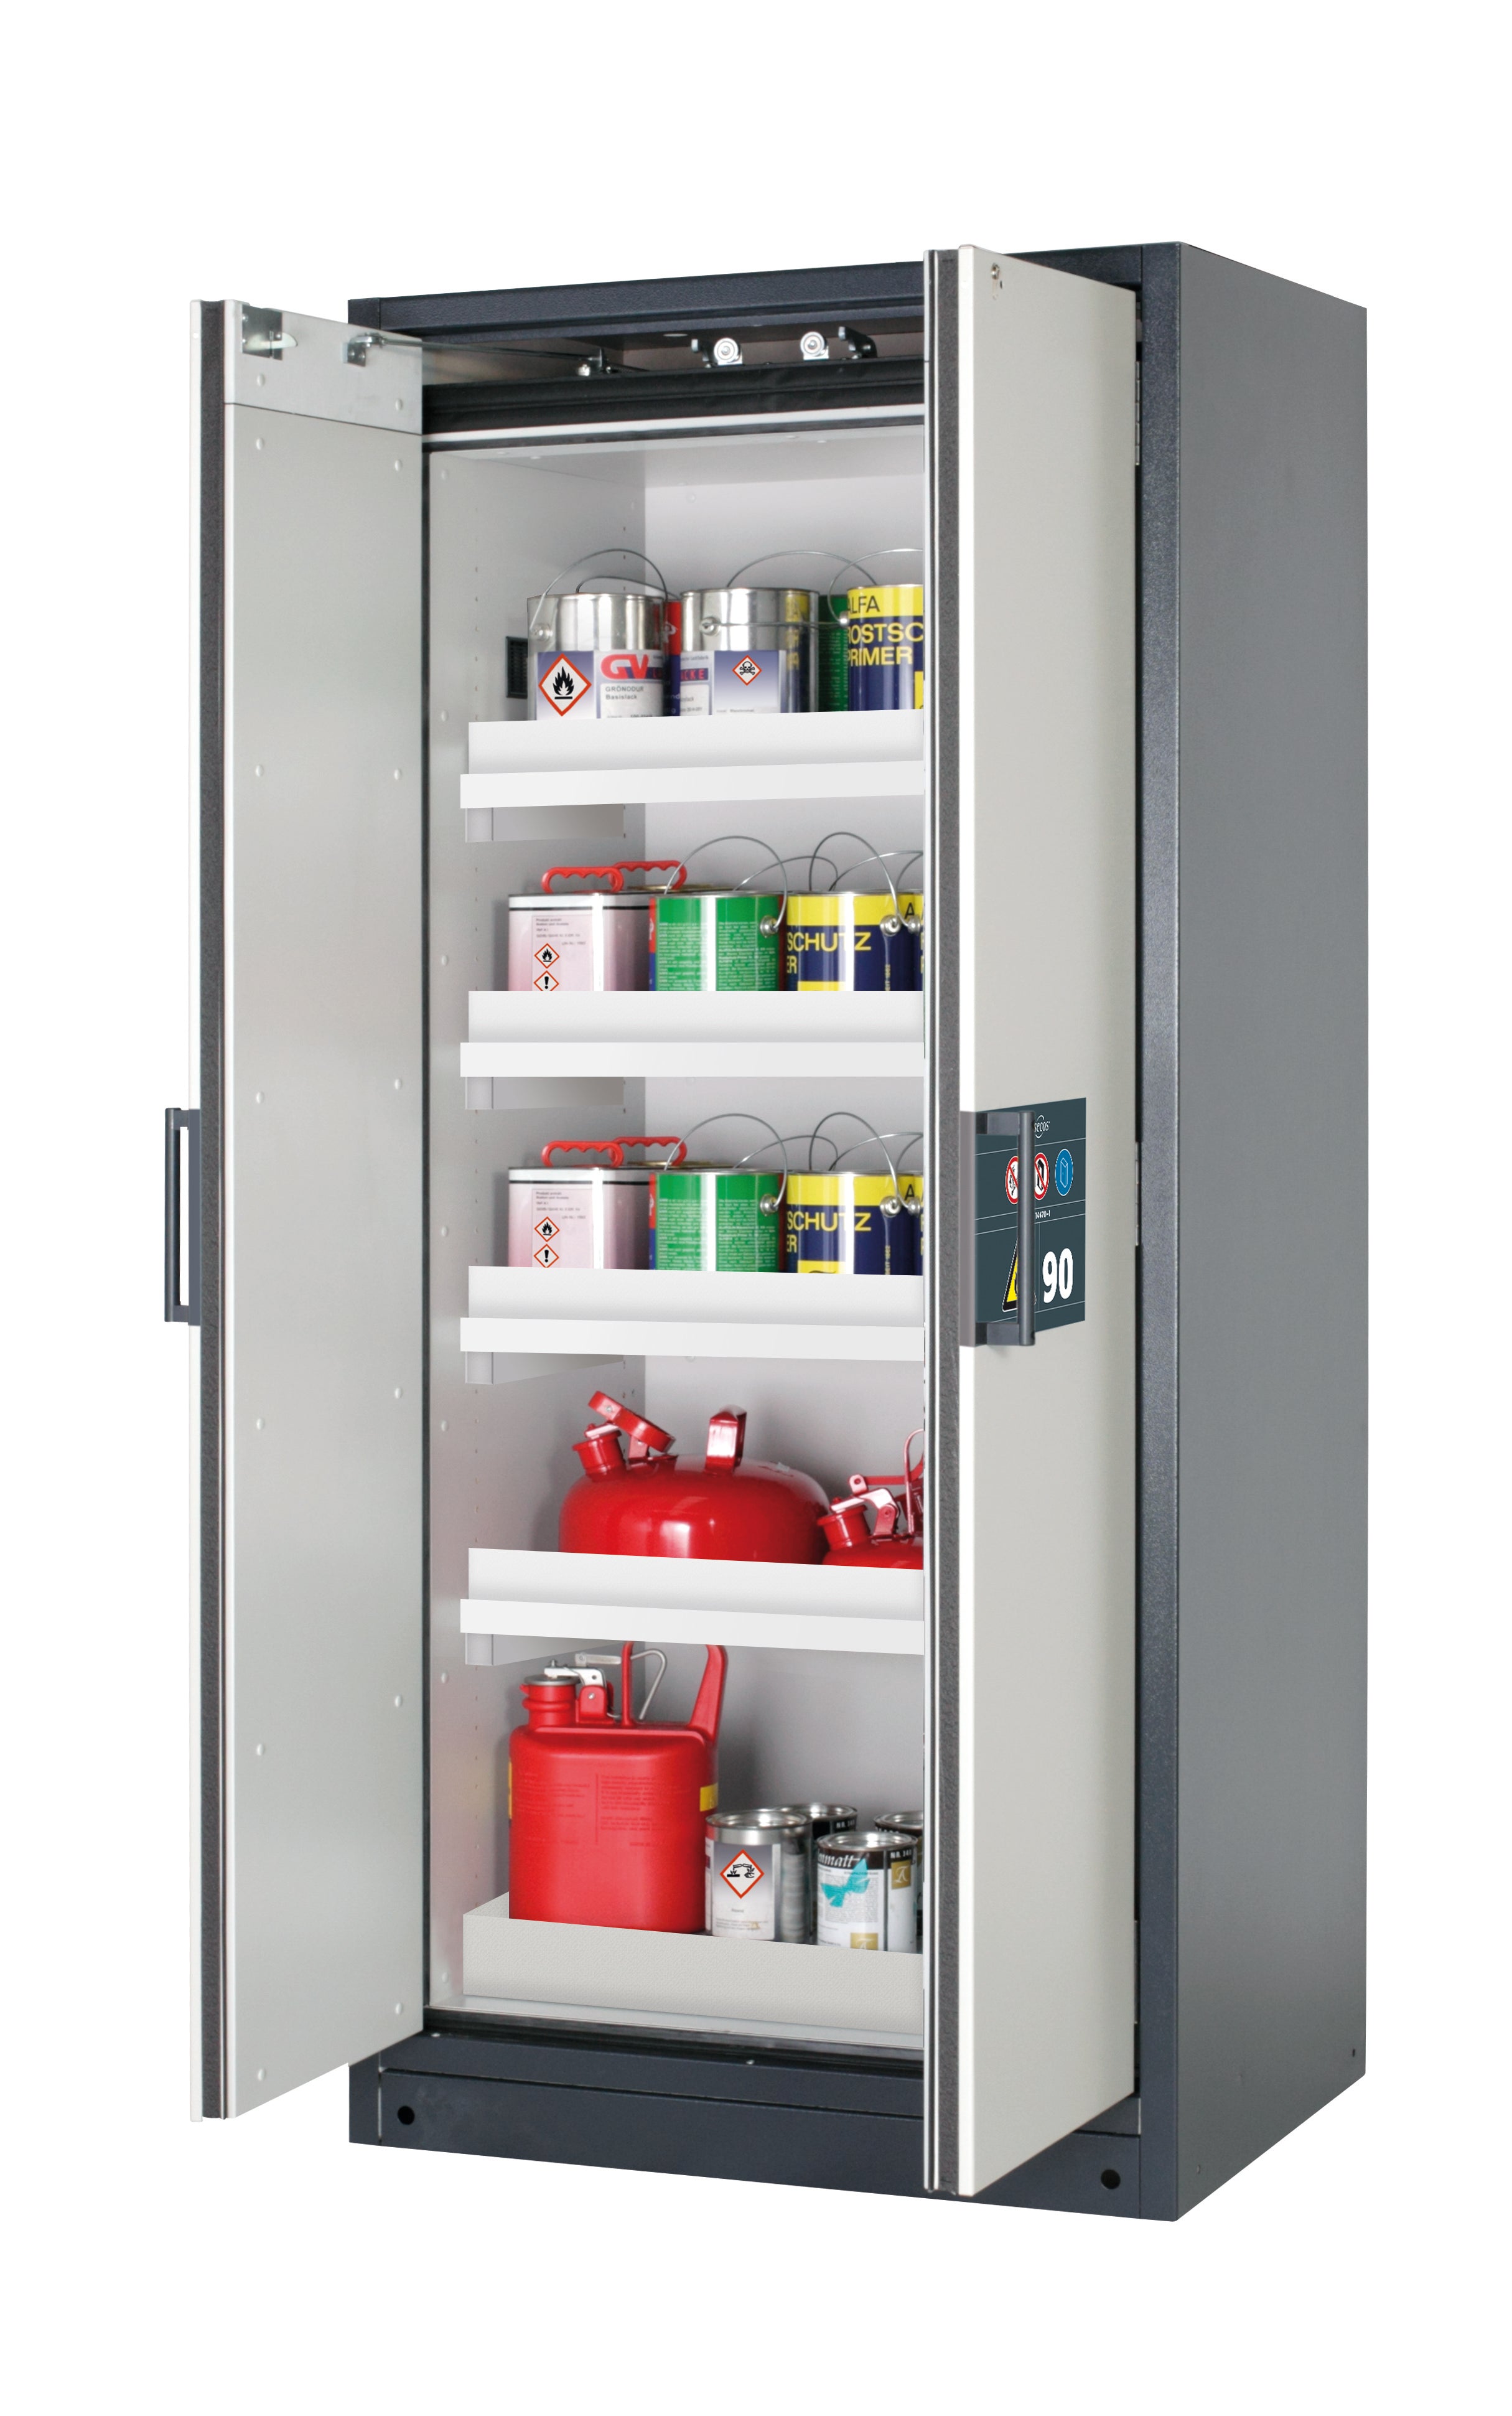 Type 90 safety storage cabinet Q-CLASSIC-90 model Q90.195.090 in light grey RAL 7035 with 4x tray shelf (standard) (polypropylene),